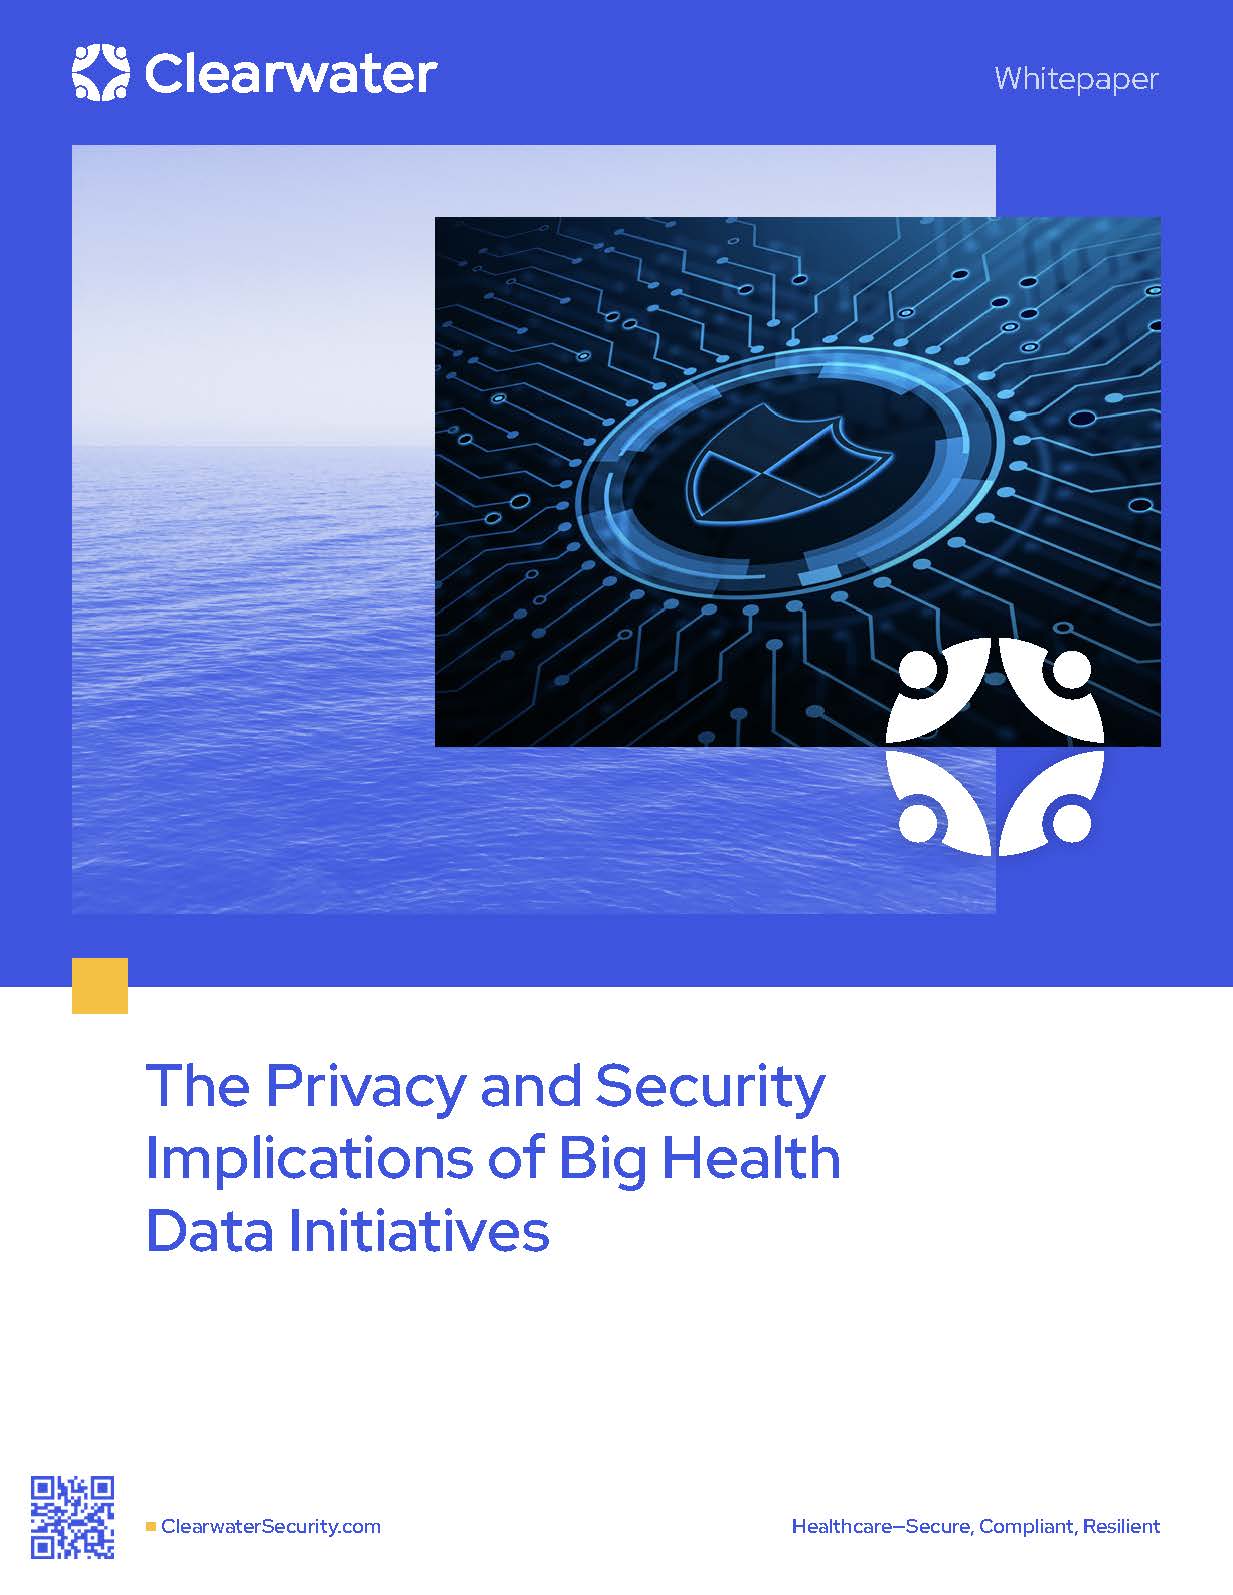 The Privacy and Security Implications of Big Health Data Initiatives by Clearwater